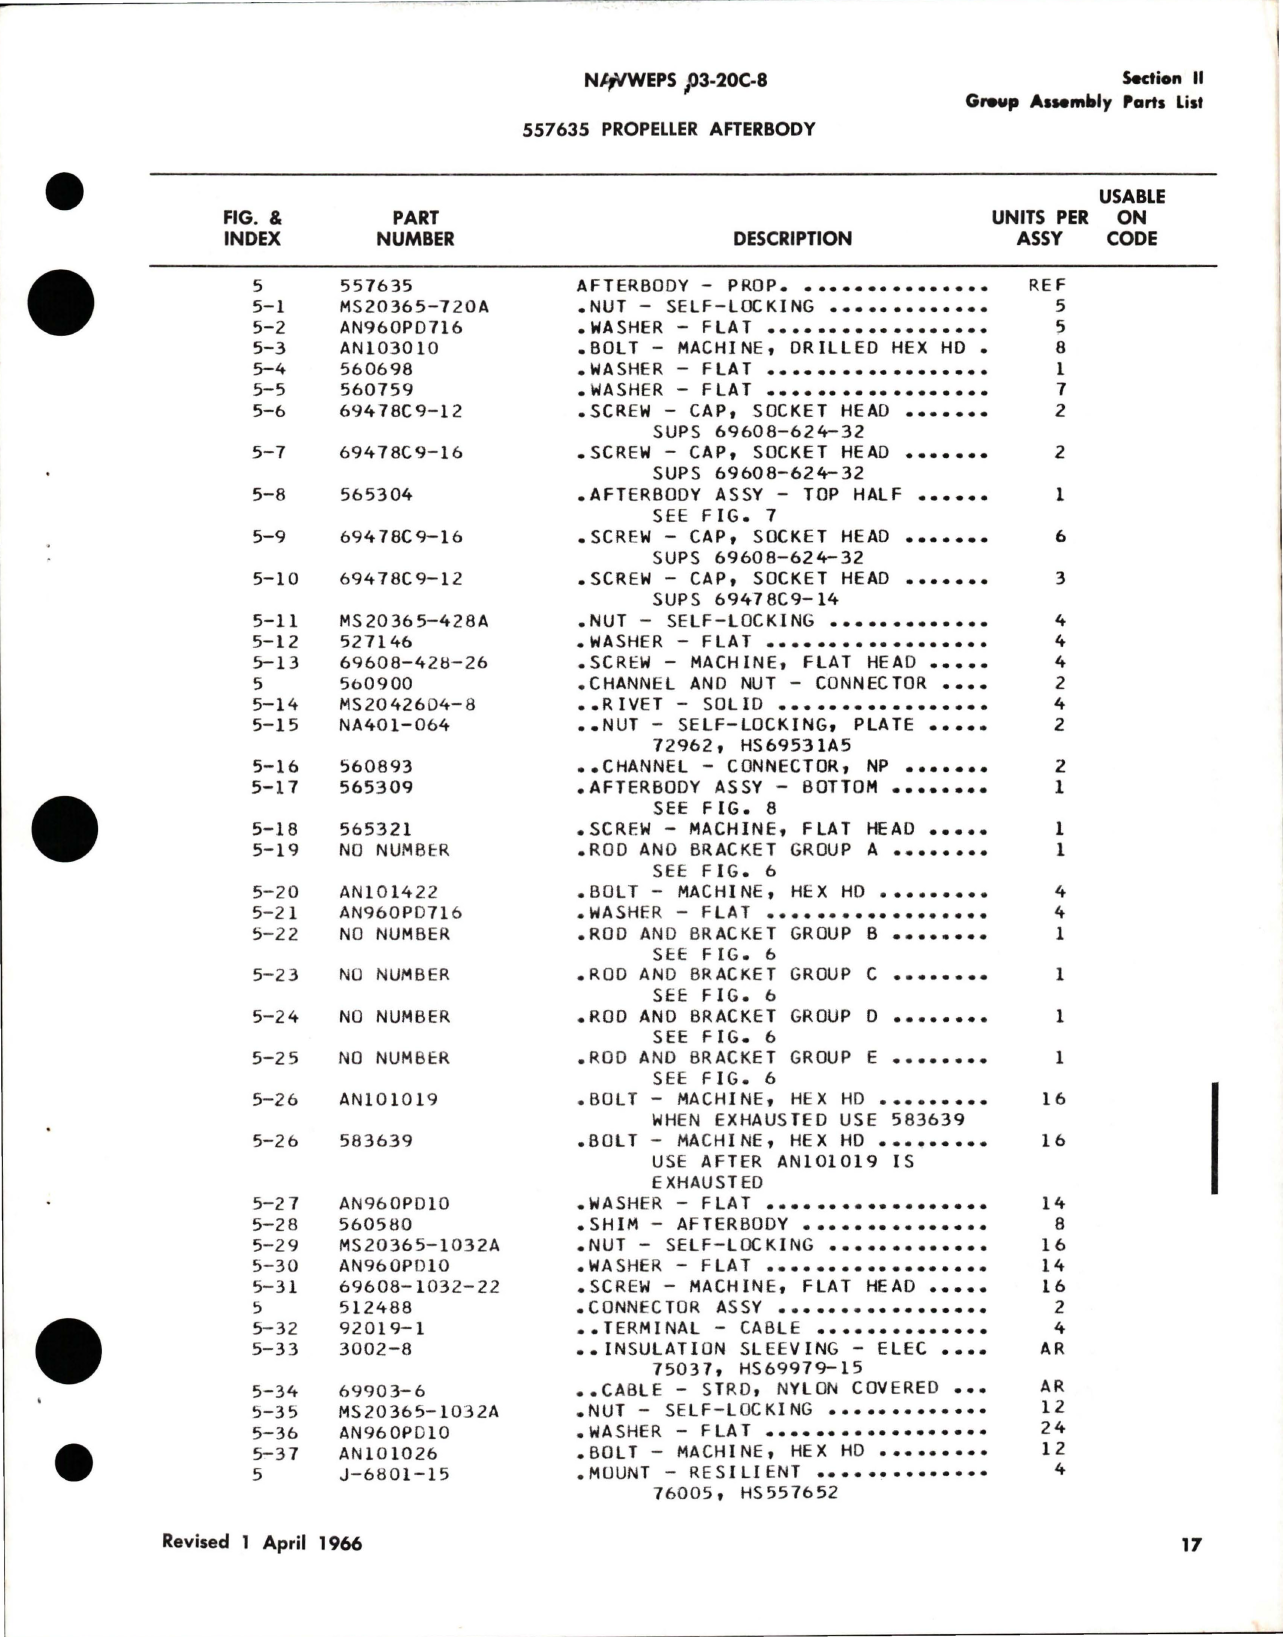 Sample page 5 from AirCorps Library document: Illustrated Parts Breakdown for Propeller Spinner, Anti-Icing, and Propeller Afterbody